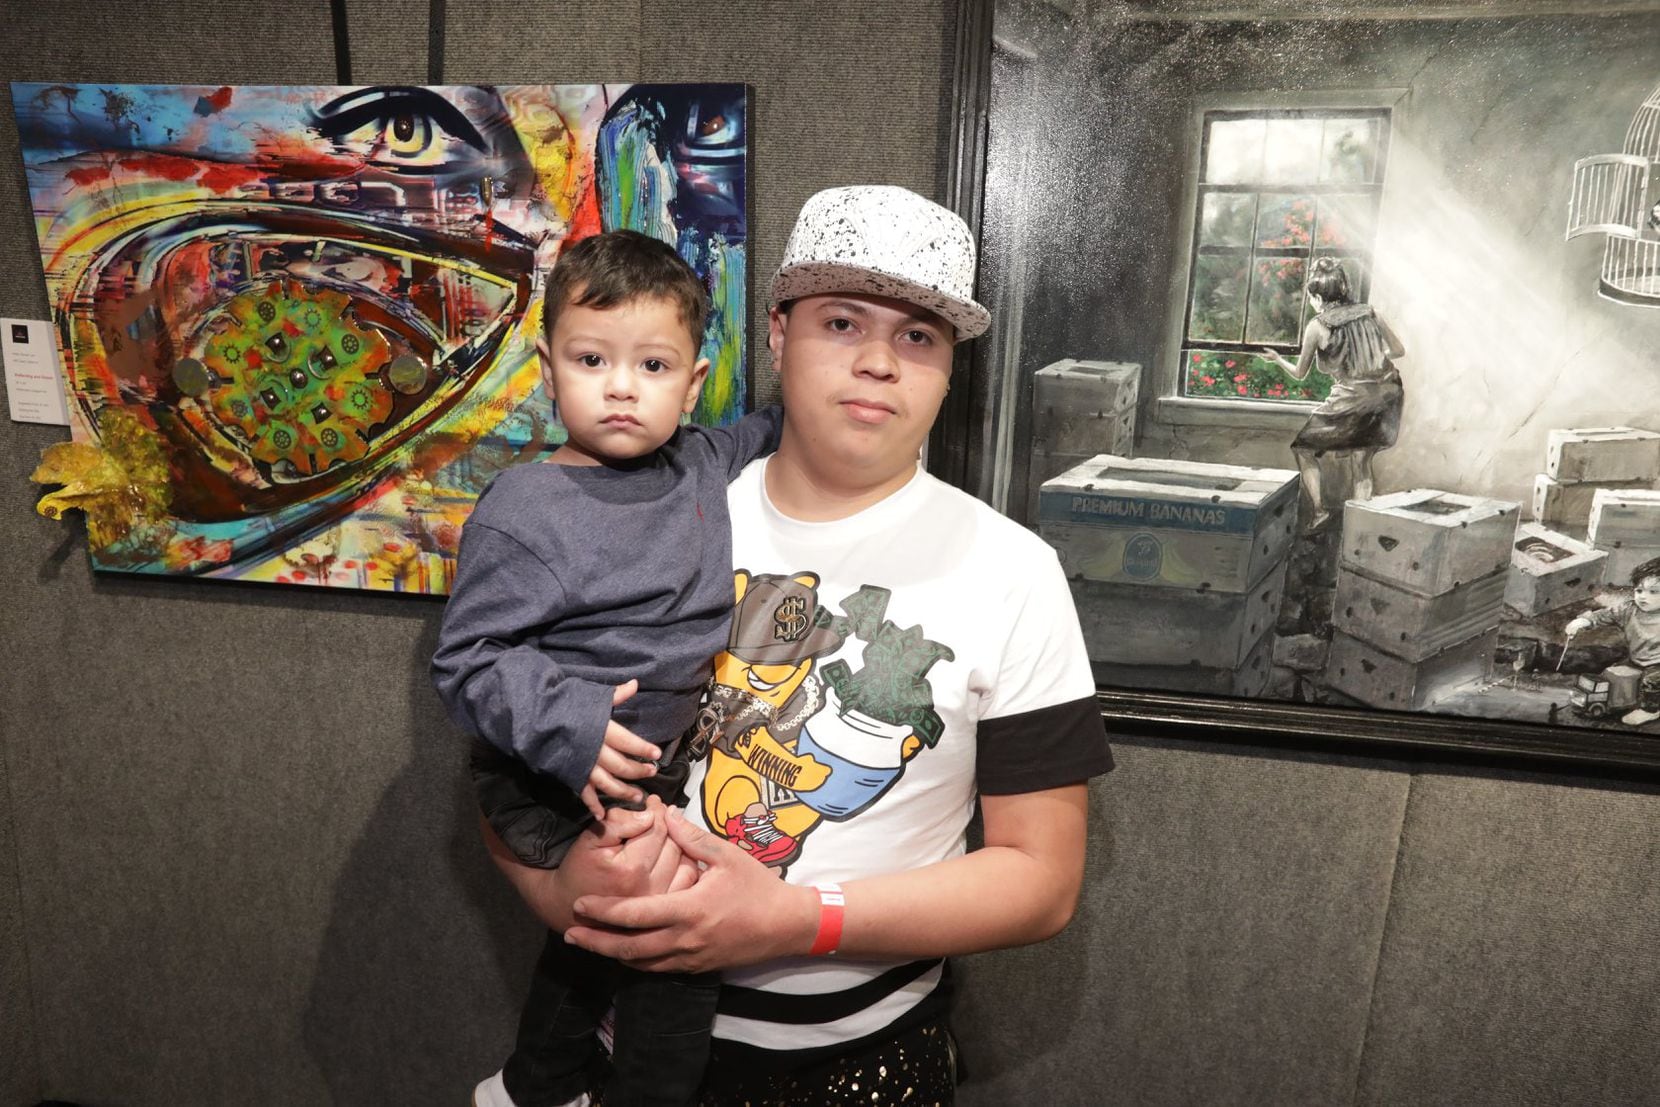 Over Selvin's right shoulder is the piece that was inspired by his story, created by Denise...